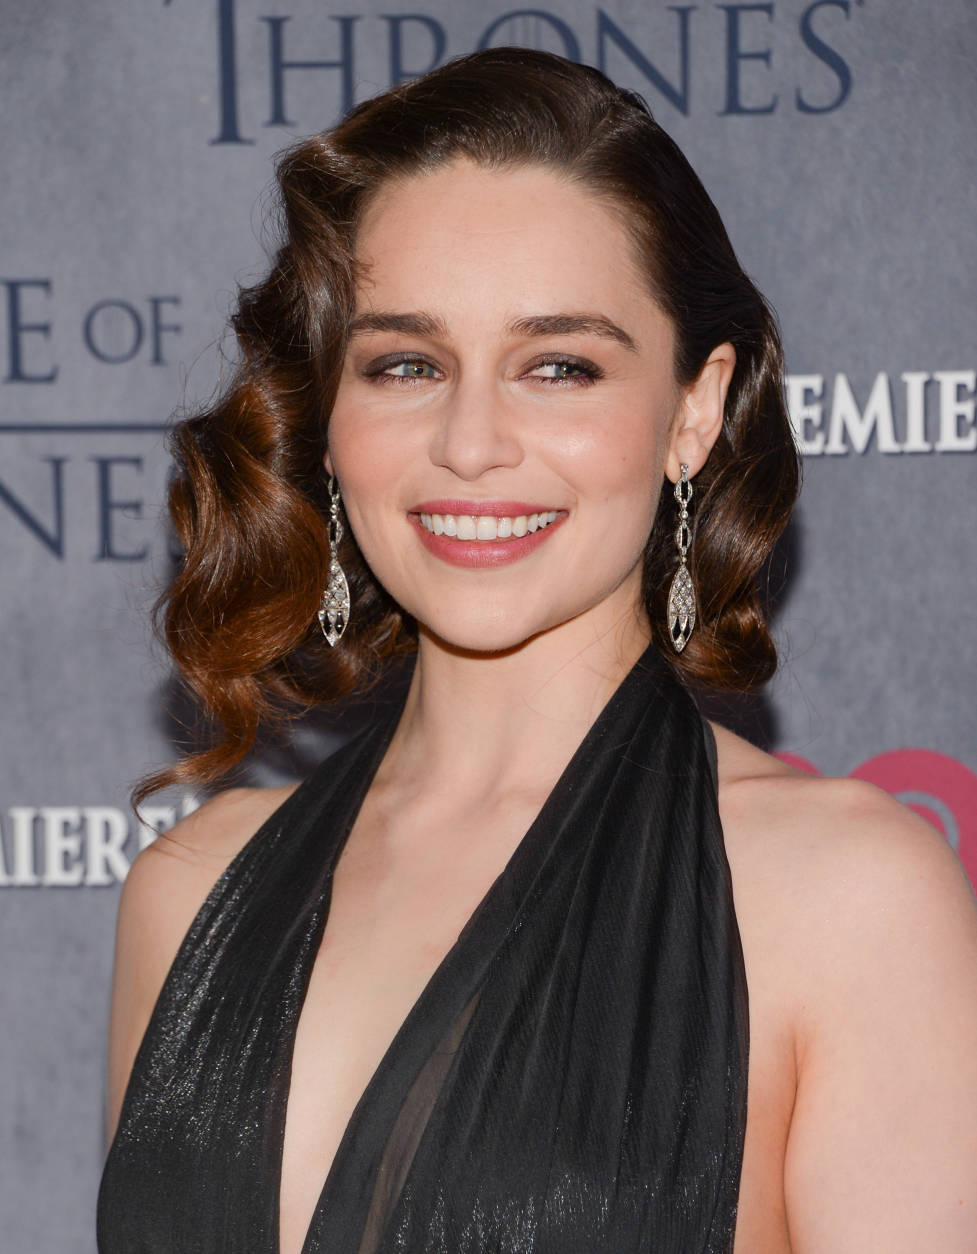 Actress Emilia Clarke attends HBO's "Game of Thrones" fourth season premiere at Avery Fisher Hall on Tuesday, March 18, 2014 in New York. (Photo by Evan Agostini/Invision/AP)